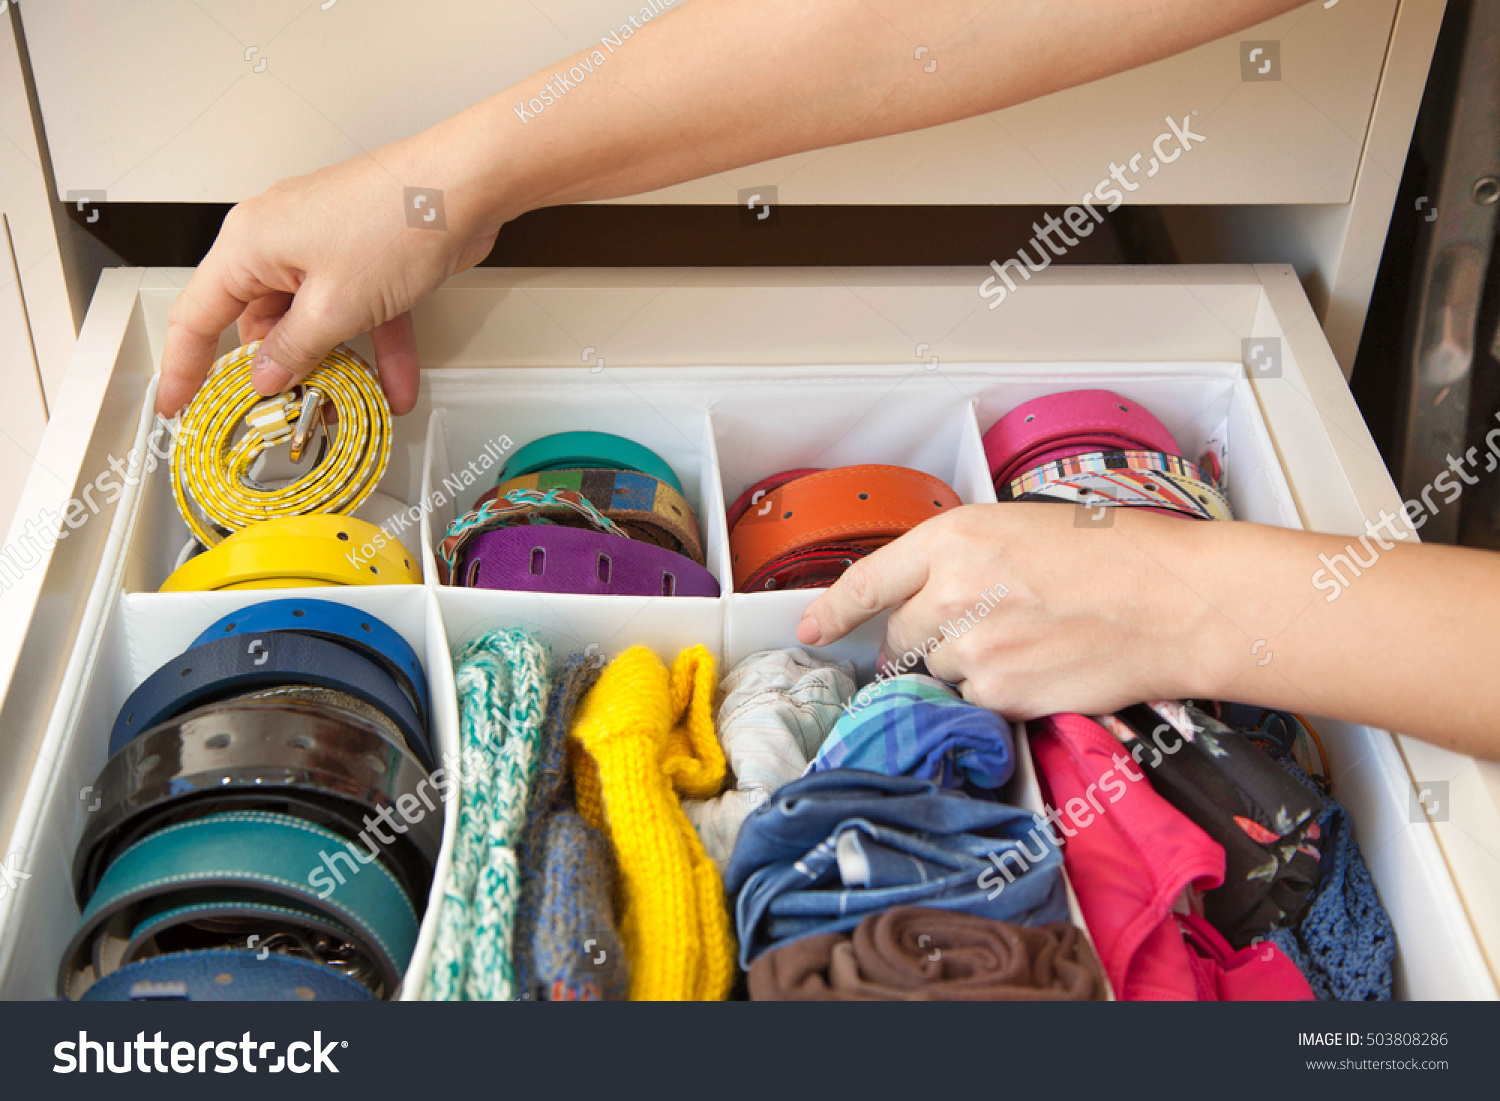 The woman pulls out a strap from a drawer of the wardrobe. Drawer with straps and belts. #503808286